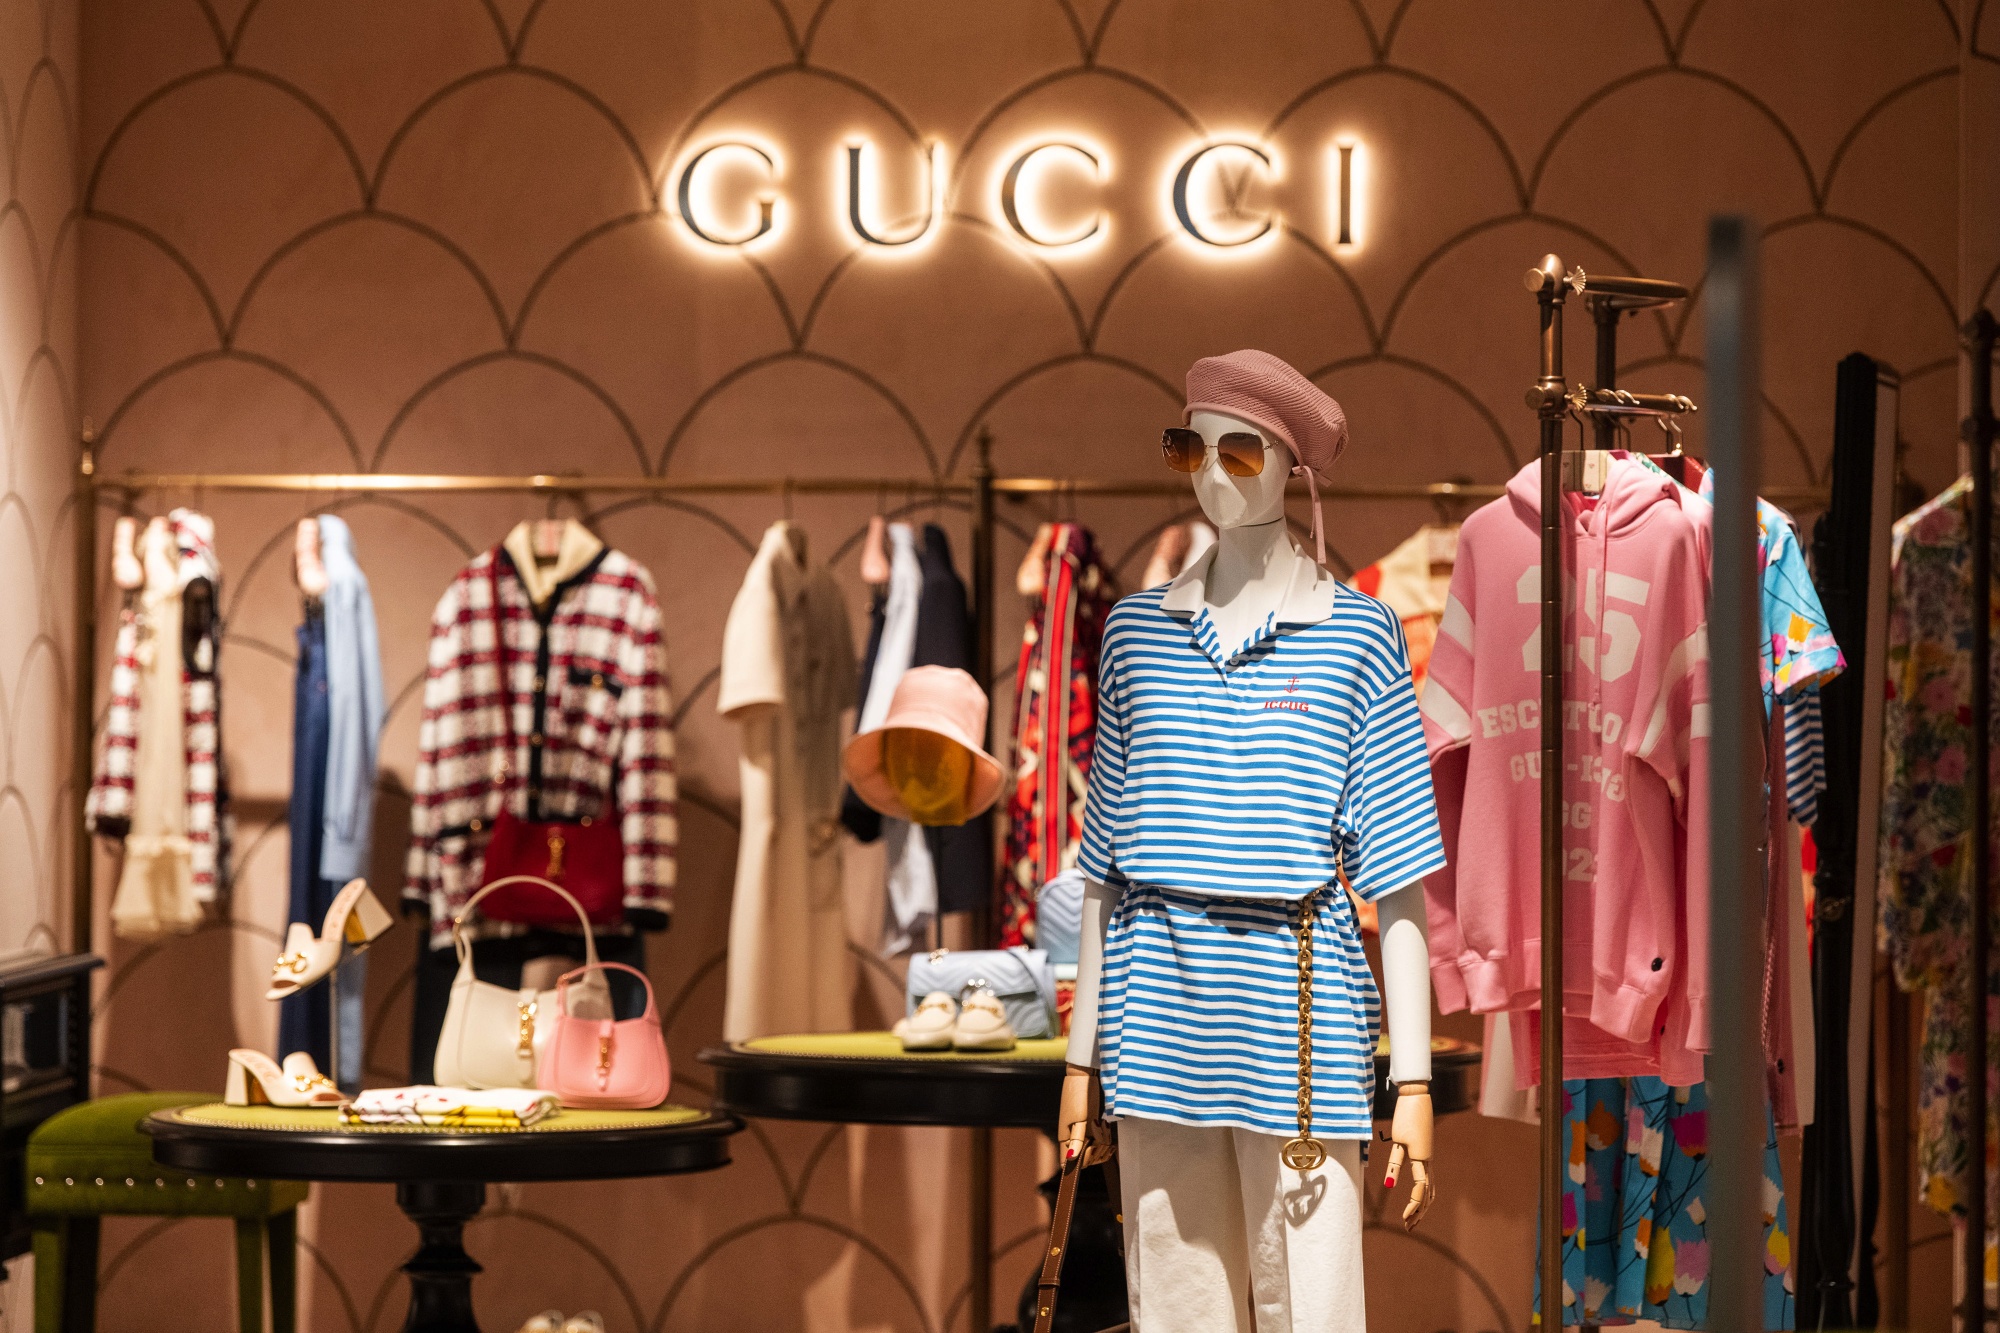 Gucci Sales Growth Sputters as Kering Label Faces Transition - Bloomberg